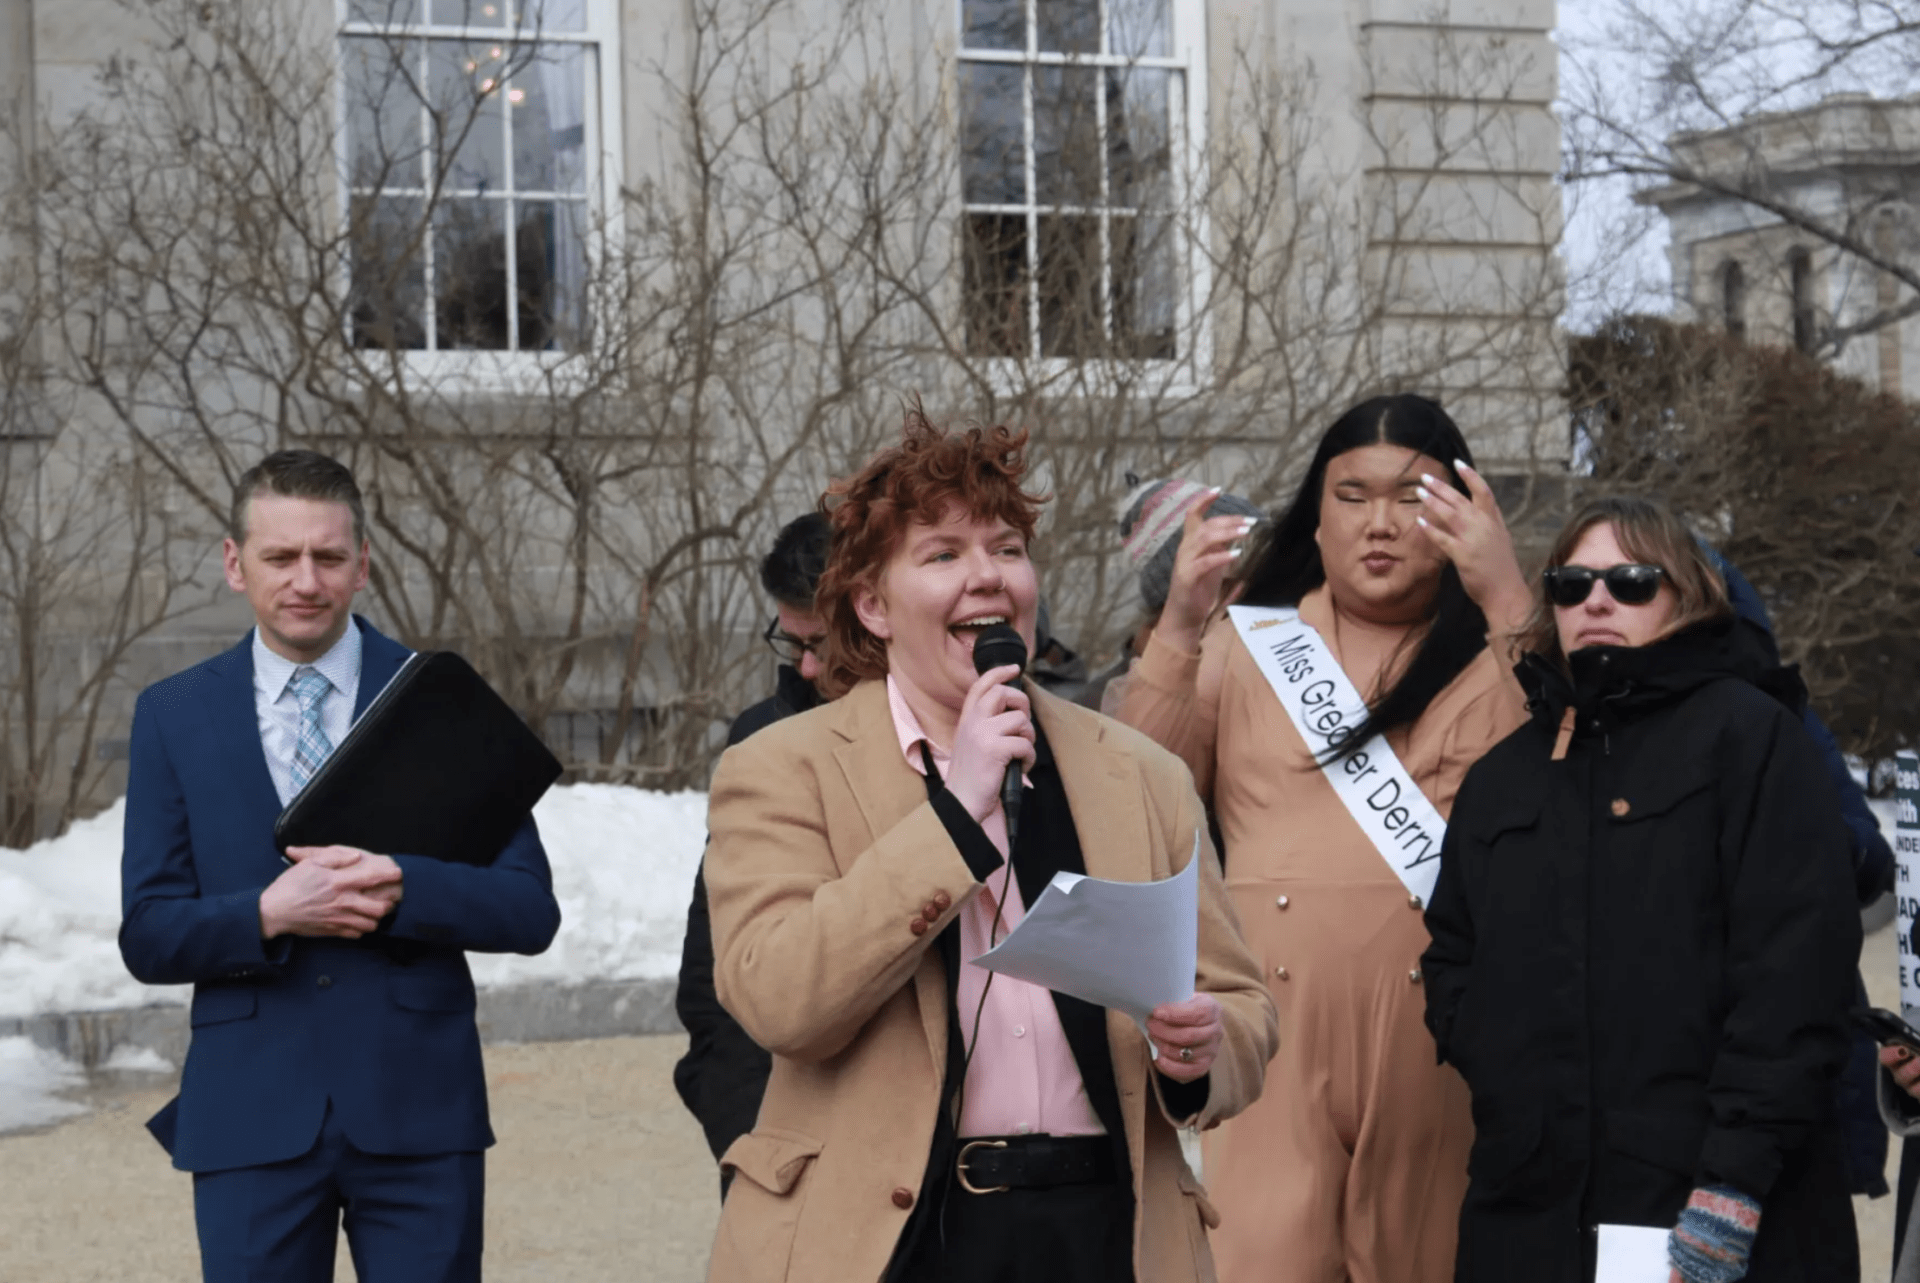 Linds Jakows, founder of the group 603 Equality, speaks at a rally opposing several bills dealing with the rights of LGBTQ+ youth at the State House, March 7. (Zoey Knox/NHPR)